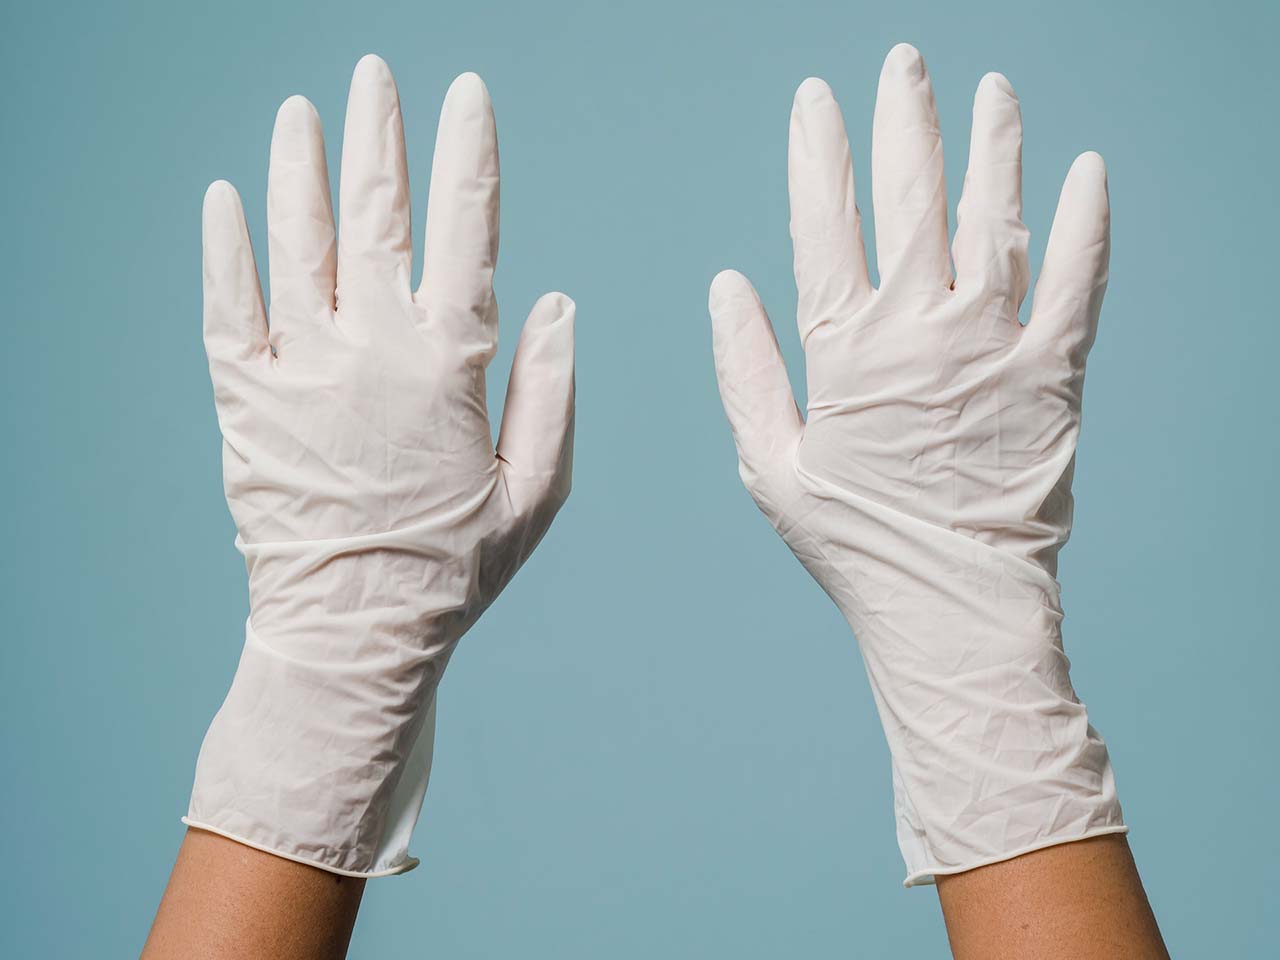 hands of a person wearing white gloves on a blue green background